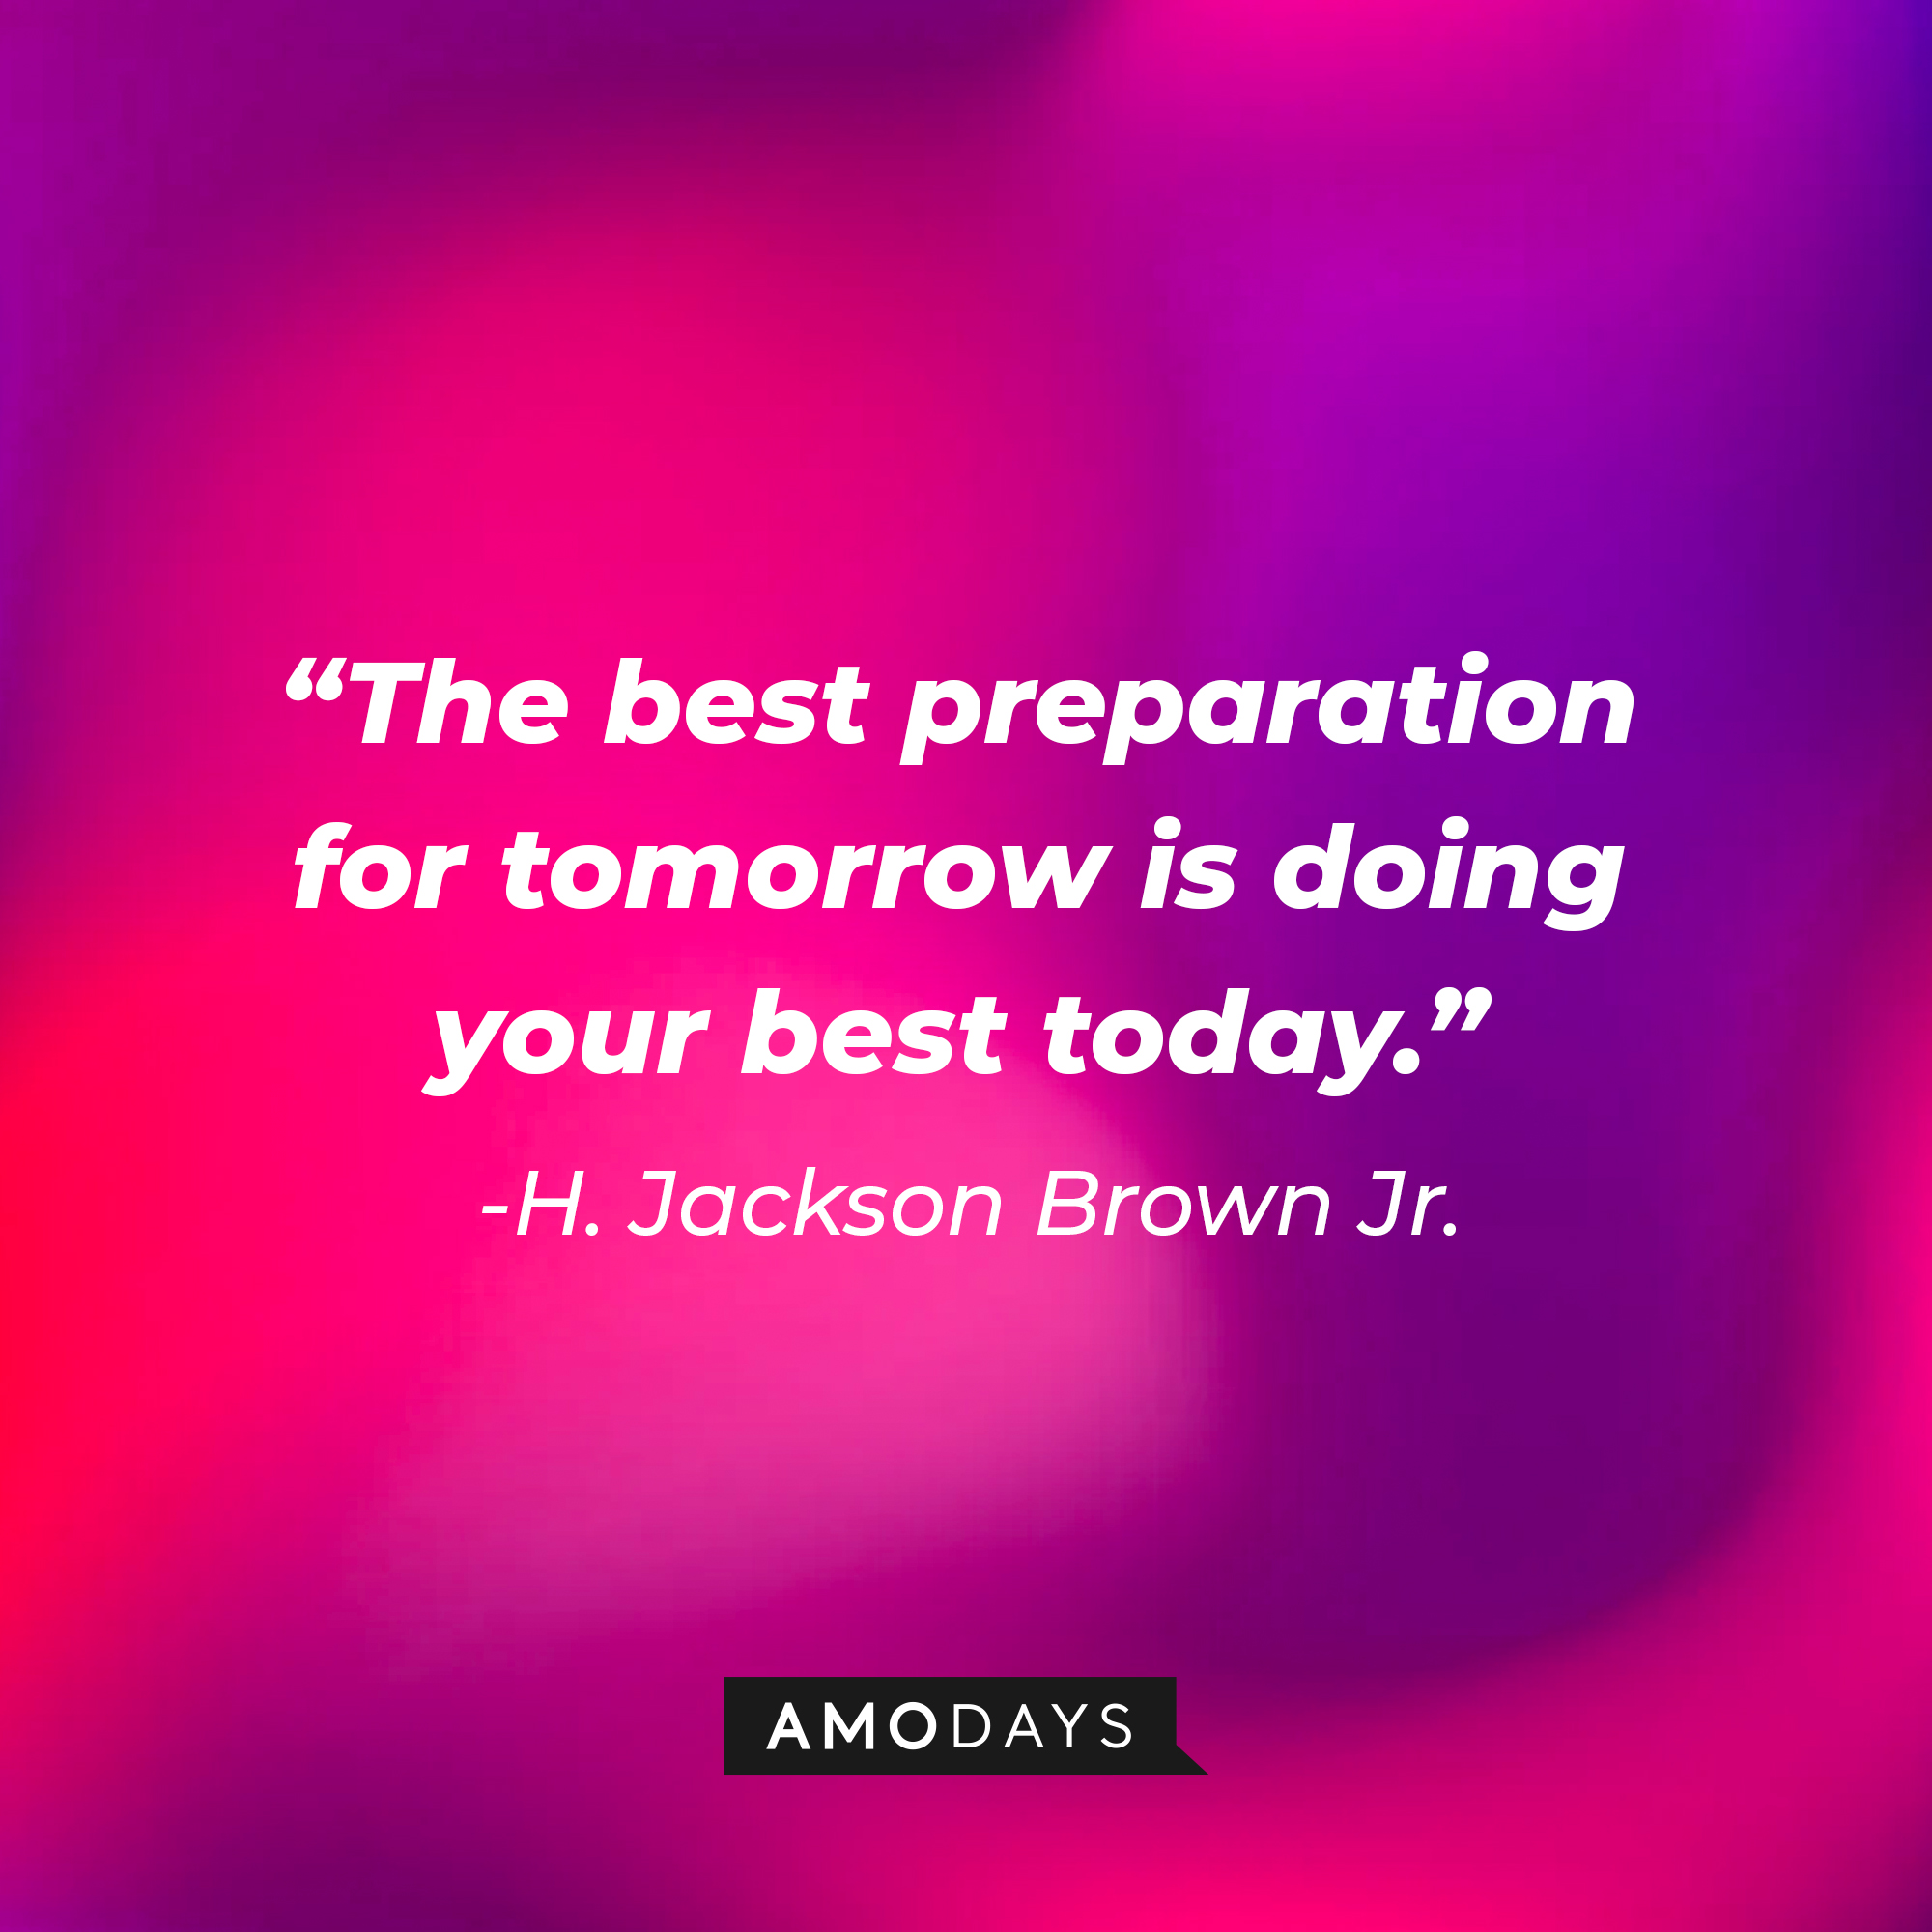 H. Jackson Brown Jr's quote: "The best preparation for tomorrow is doing your best today." | Image: Amodays